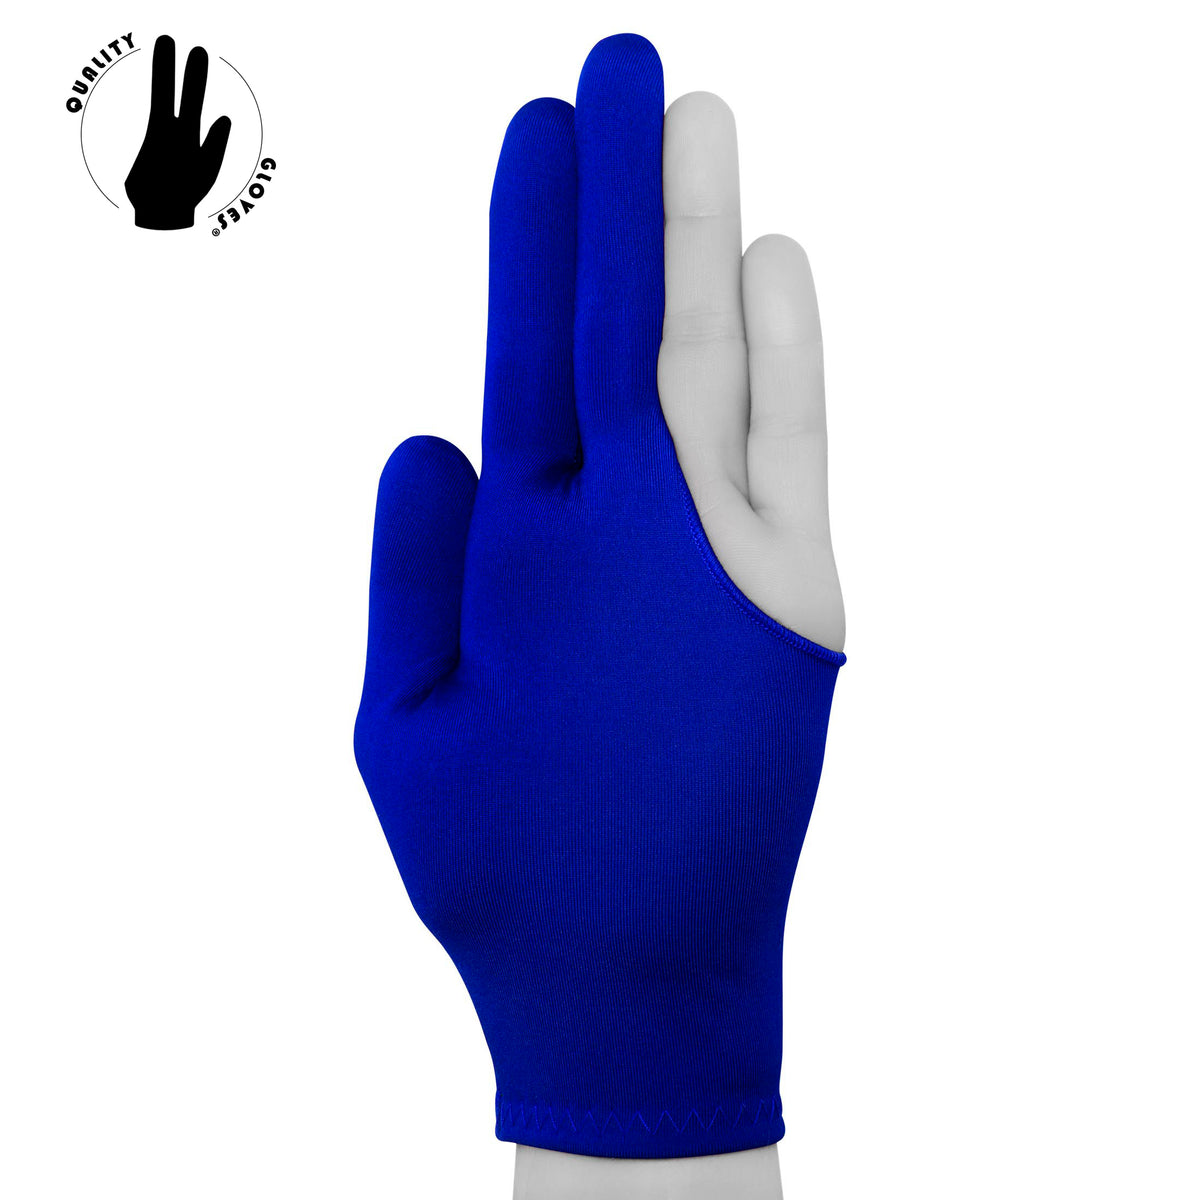 Fits Either Hand Classic Billiard Pool Cue Glove by Fortuna Blue 